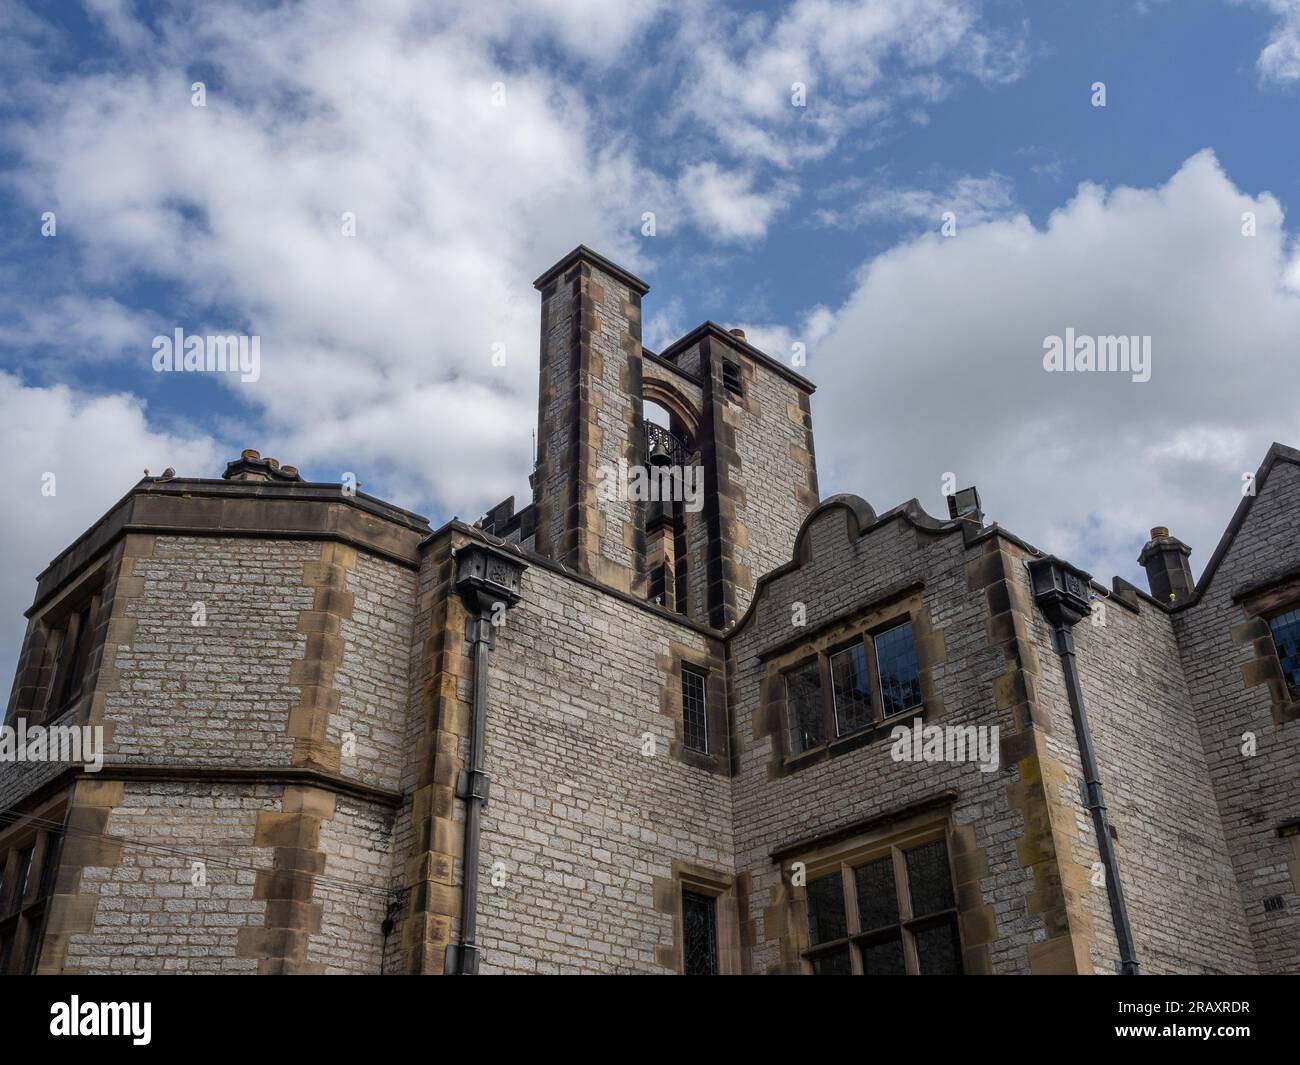 Thornbridge Hall, a country house in the Jacobean style, Derbyshire, UK Stock Photo